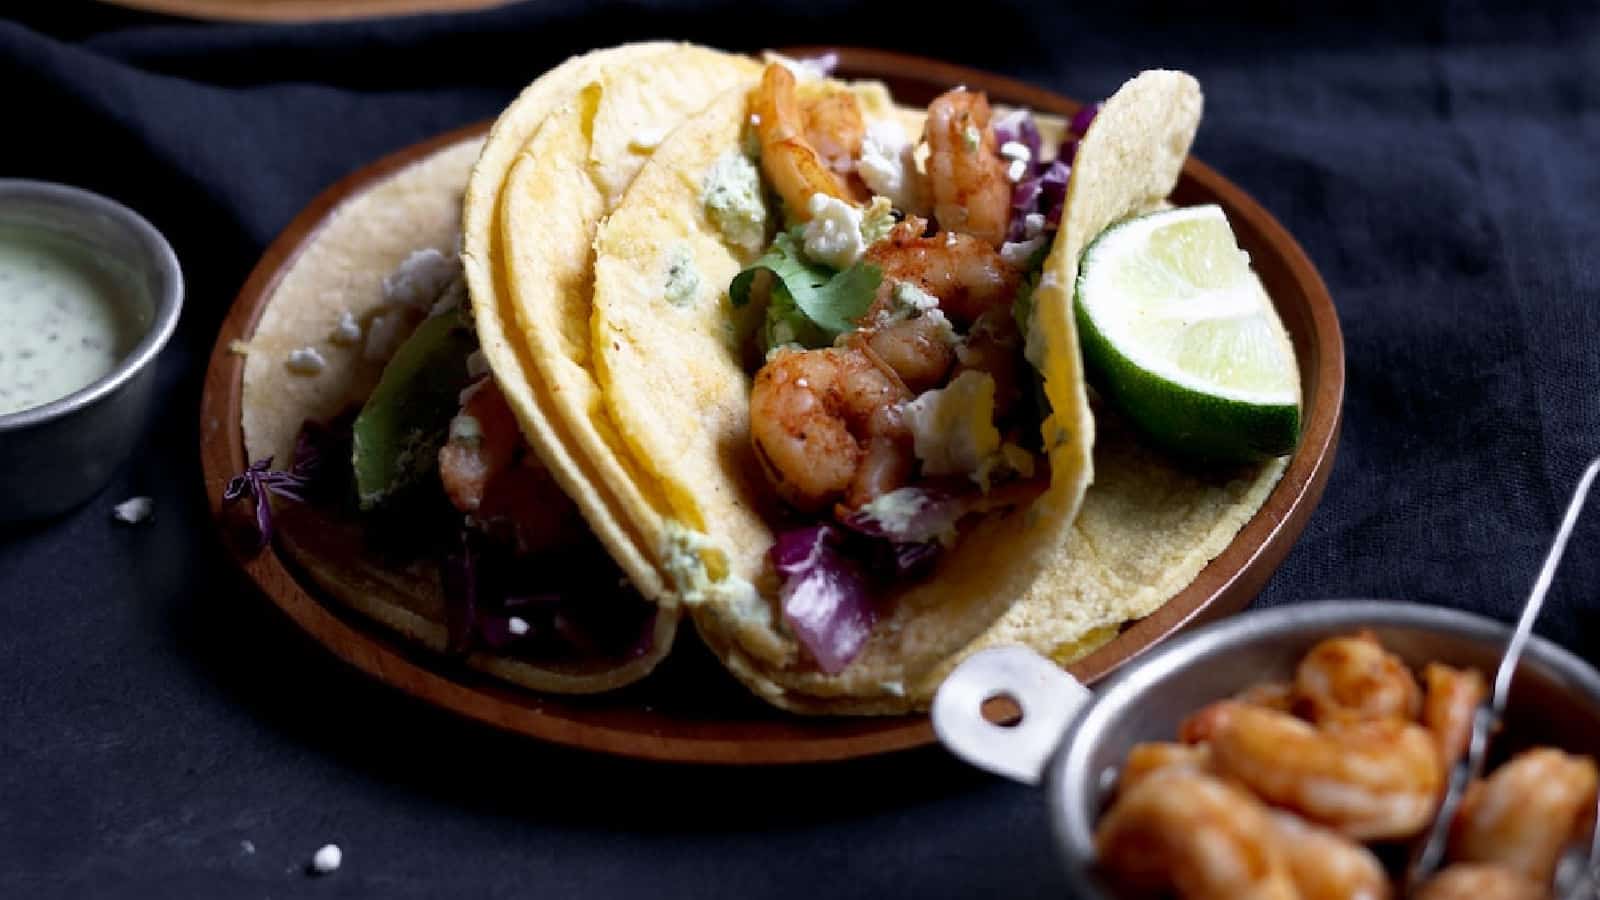 Deliciously plated Chili's Spicy Shrimp Tacos, a beloved recipe capturing the perfect fusion of heat and flavor.